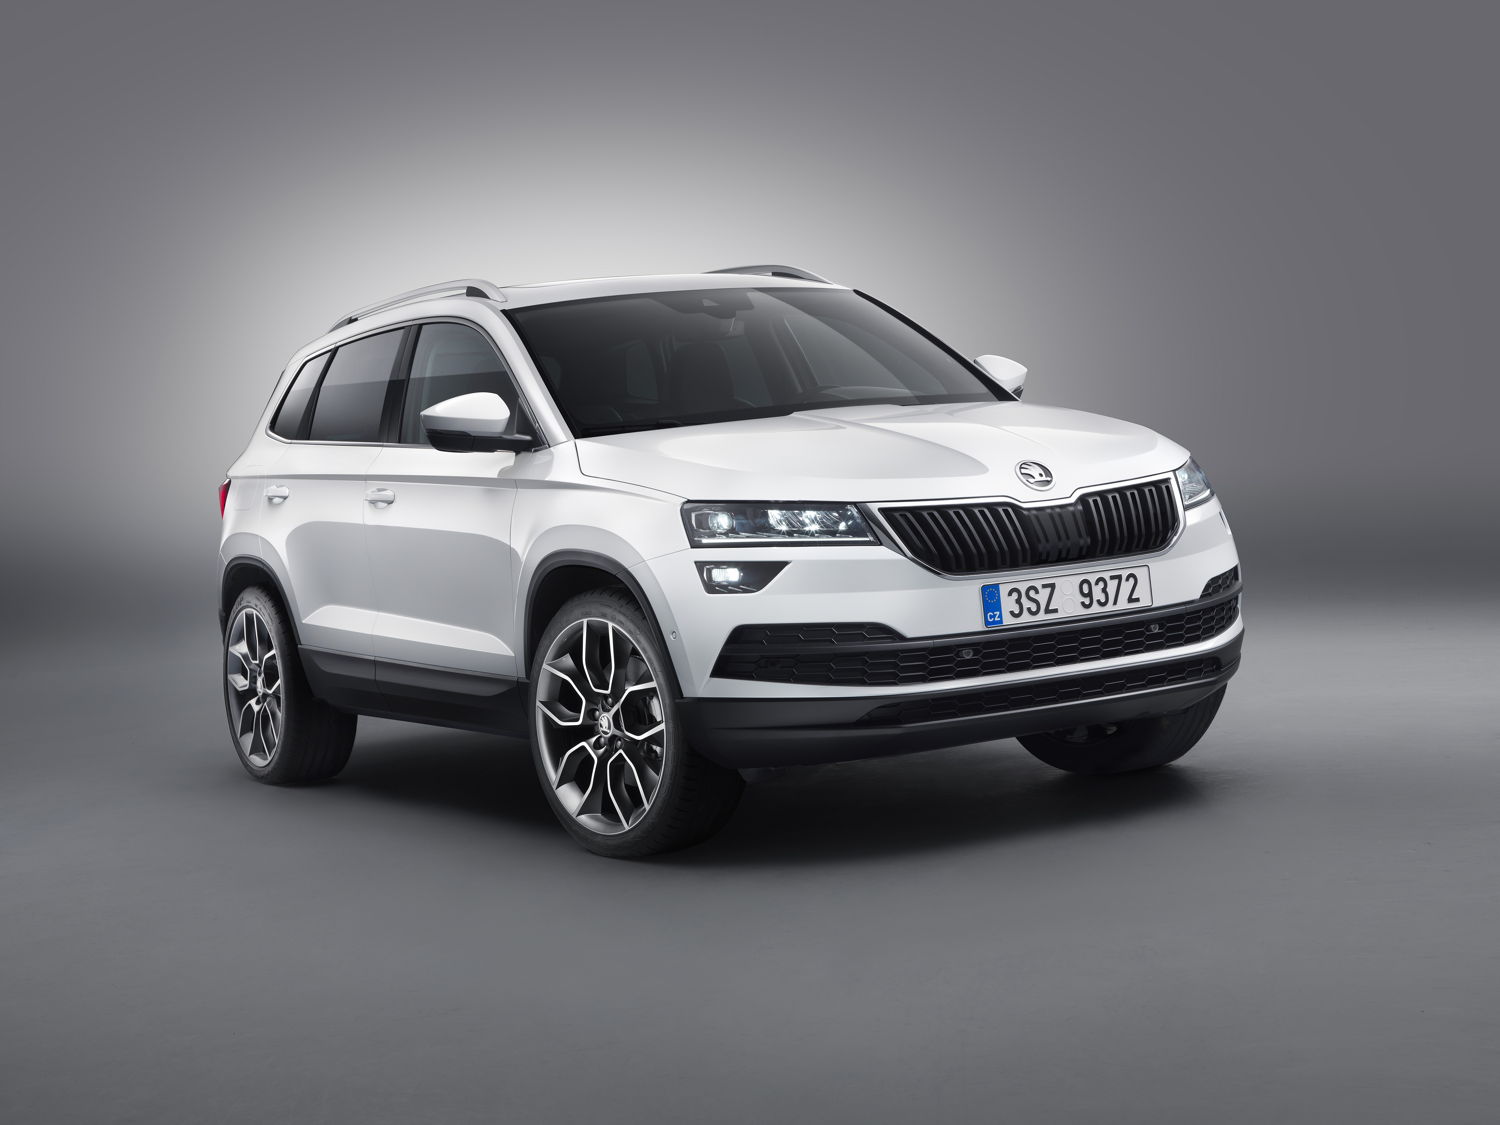 The emotional and dynamic design of the ŠKODA KAROQ is an ideal match for the starting field.